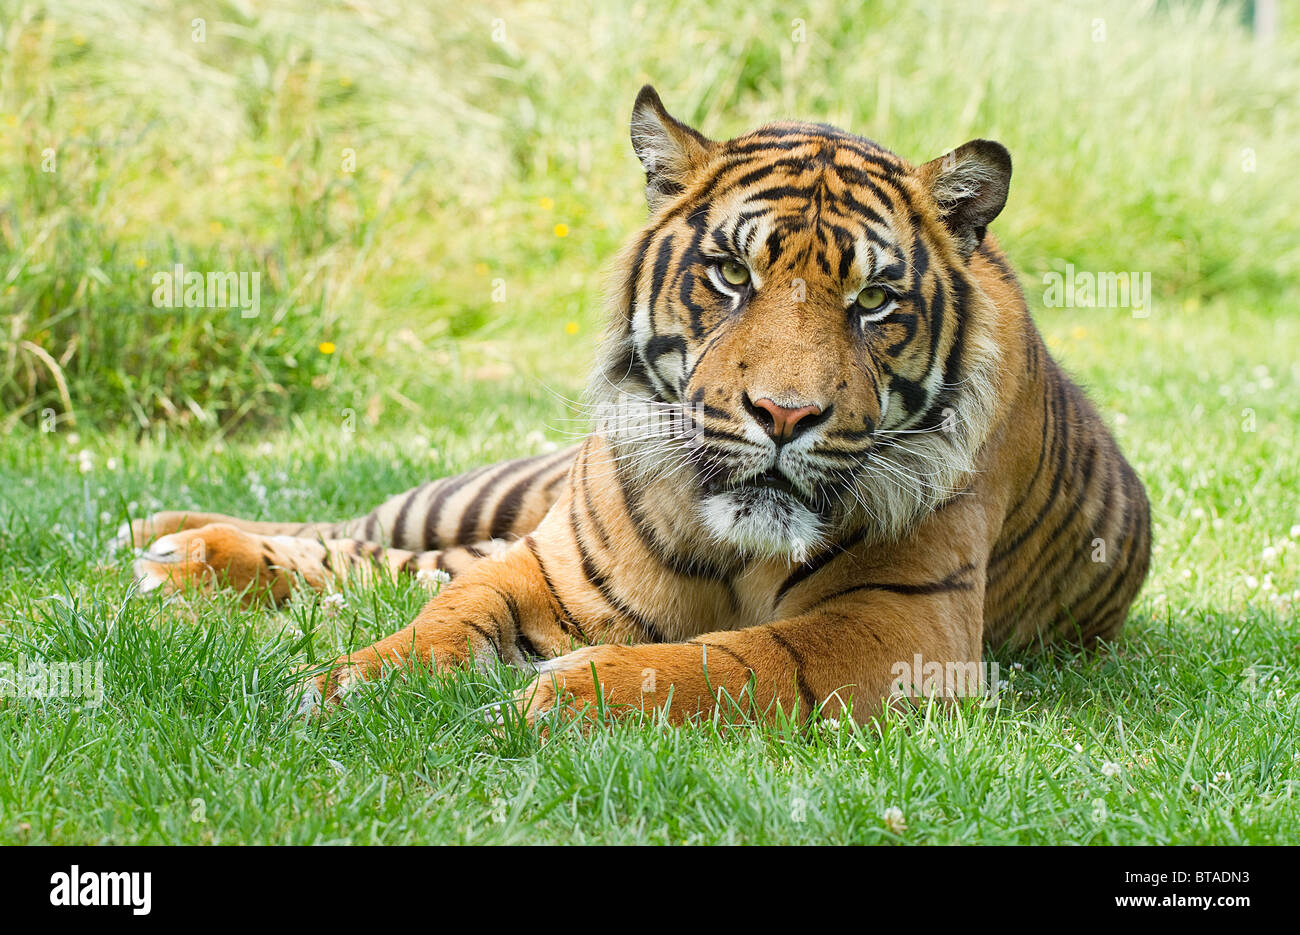 Sumartran tiger resting in the grass Stock Photo